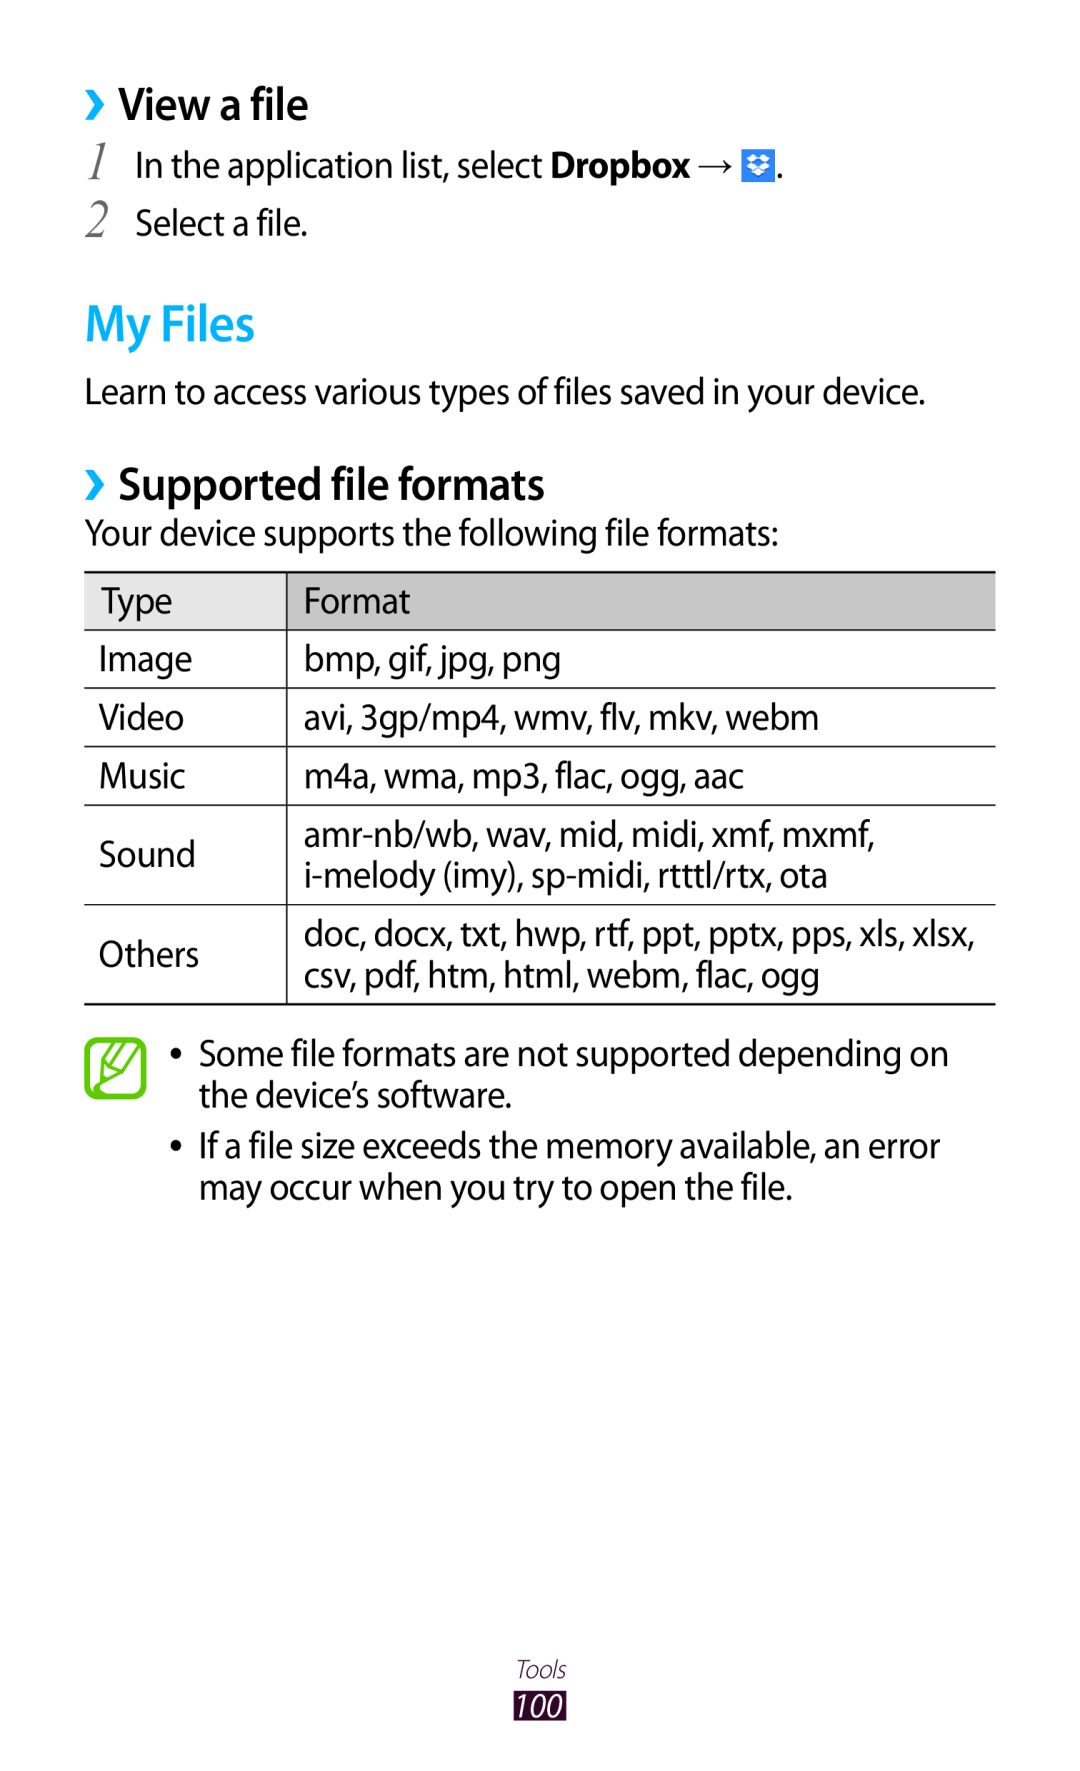 Samsung GTP5110ZWMTTT manual My Files, ››View a file, ››Supported file formats 